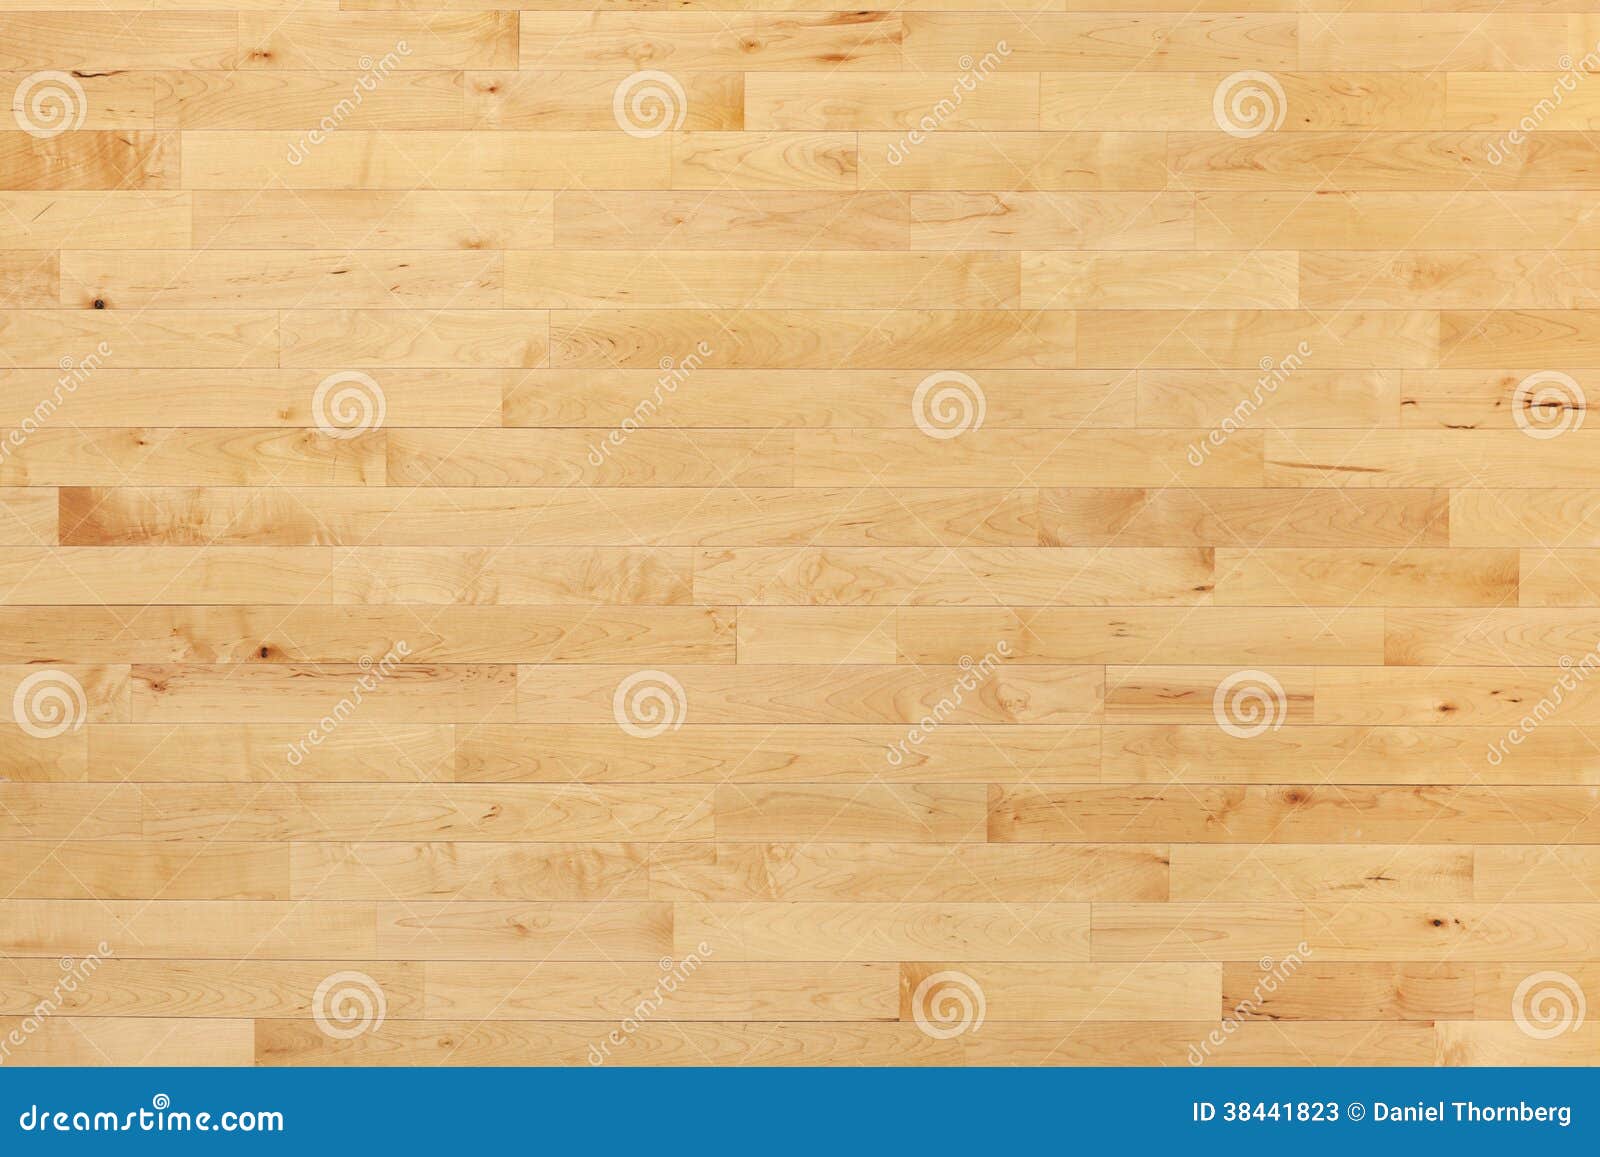 Hardwood Basketball Court Floor Viewed From Above Stock